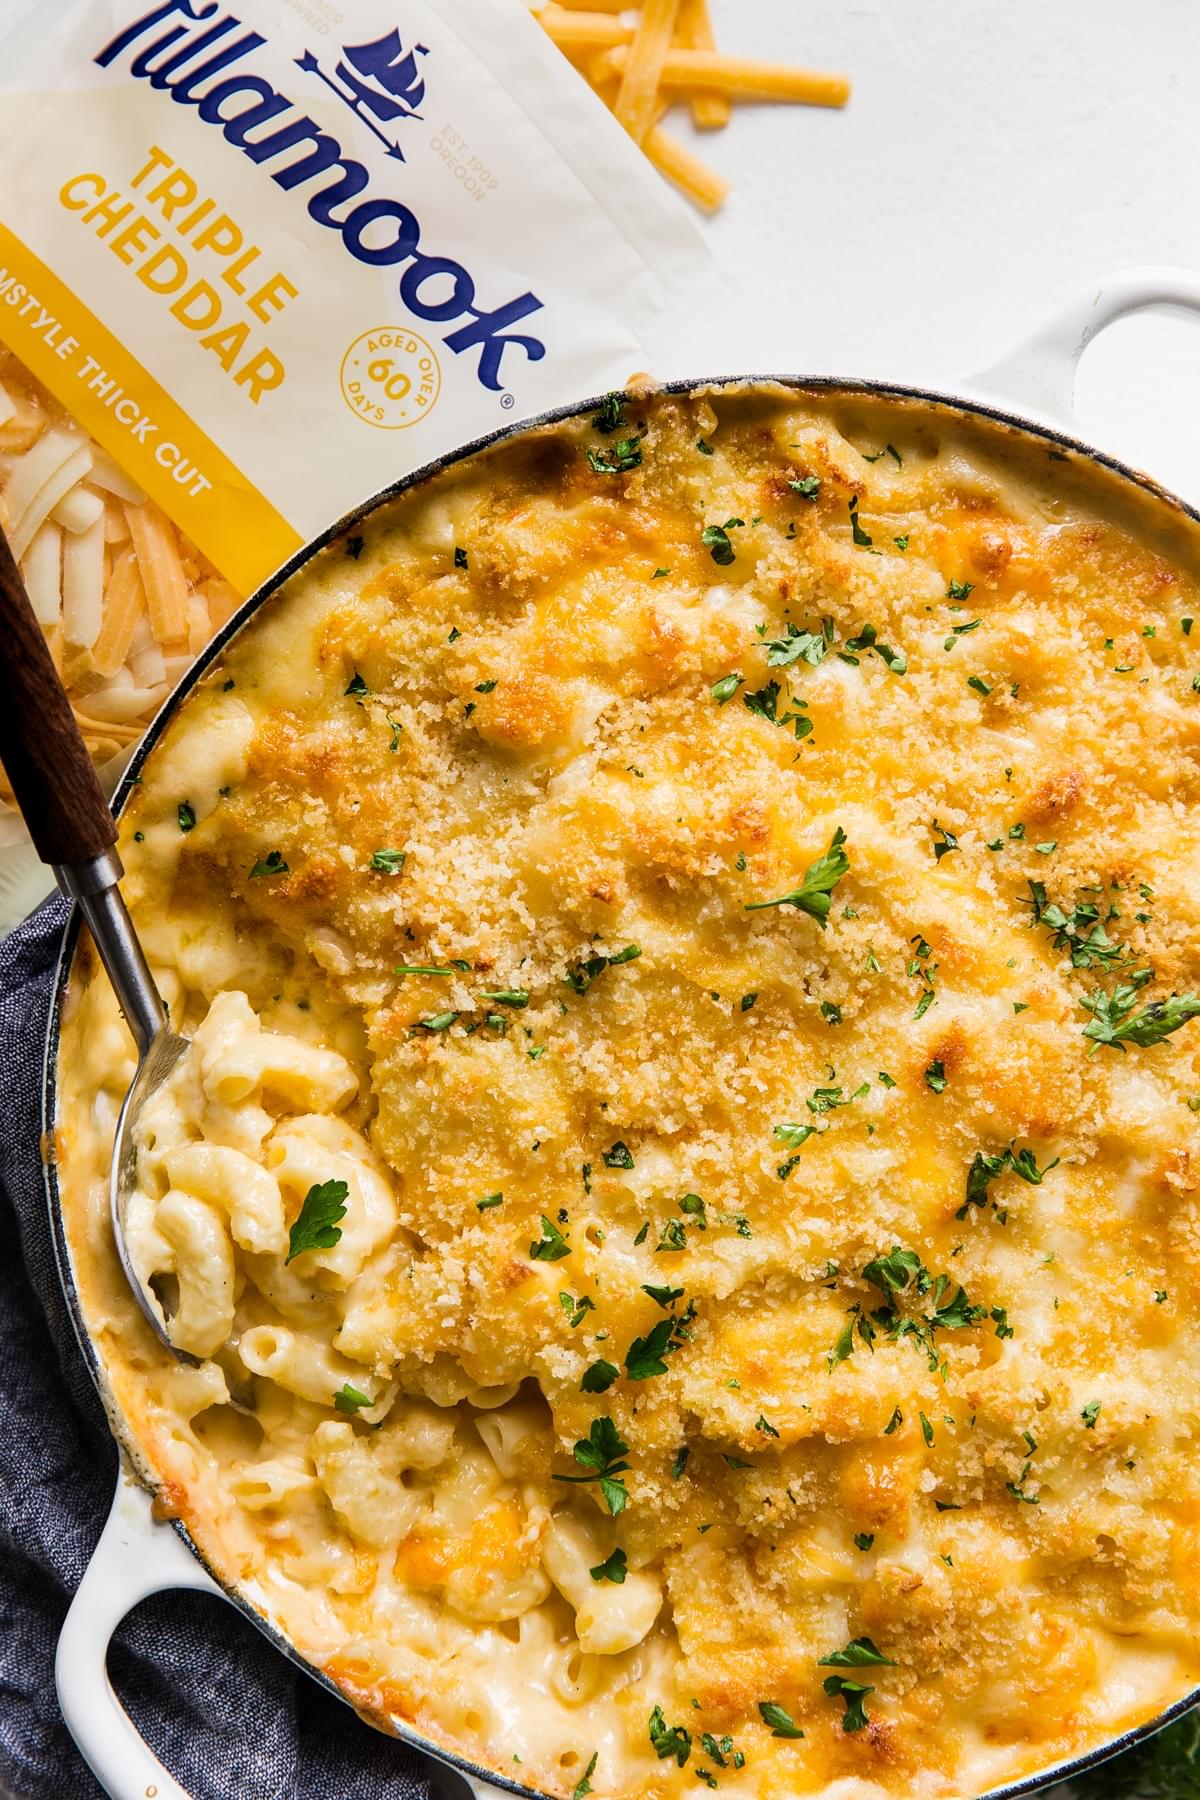 Classic Baked Macaroni And Cheese fresh from the oven with serving spoon and shredded Tillamook cheese in a bag